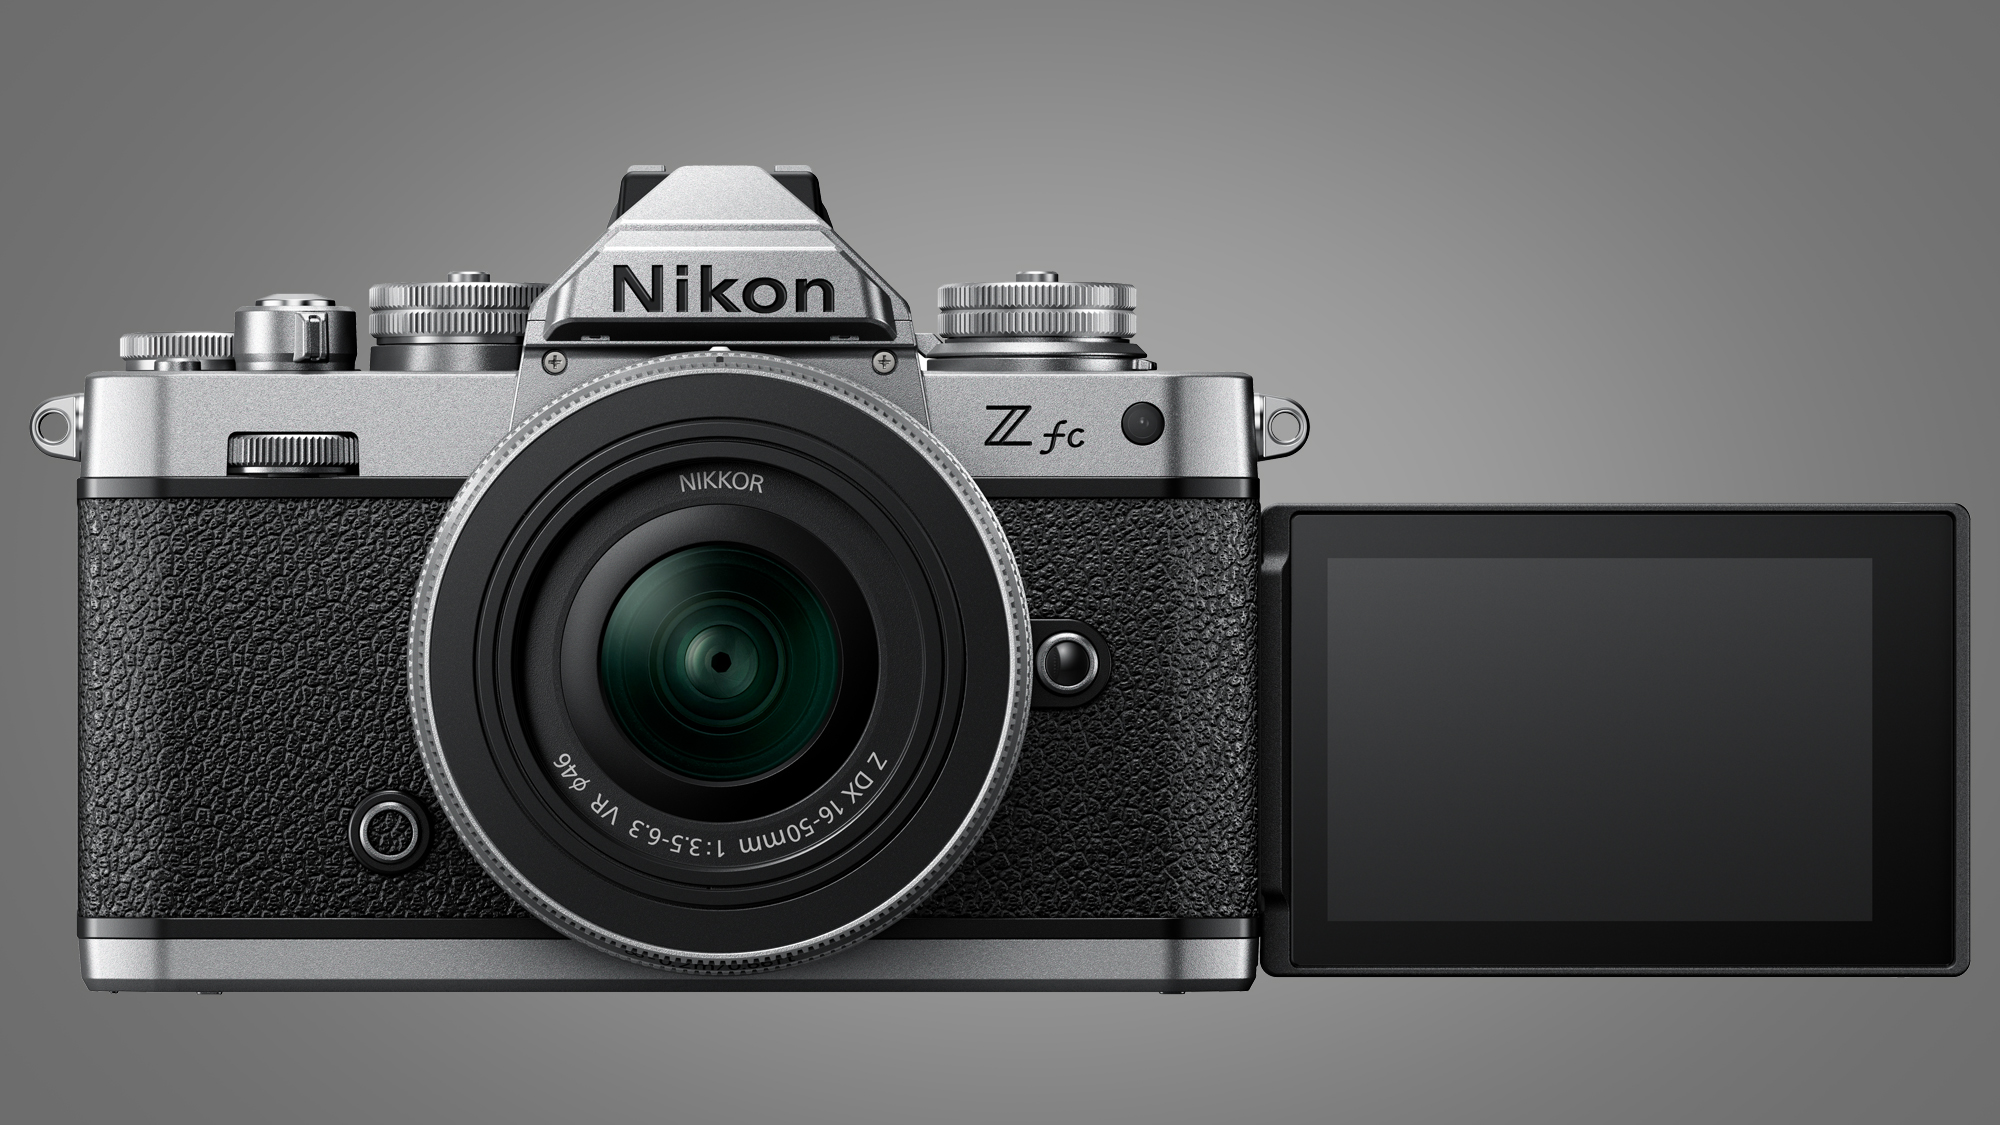 Image of the Nikon Z fc on a gray background